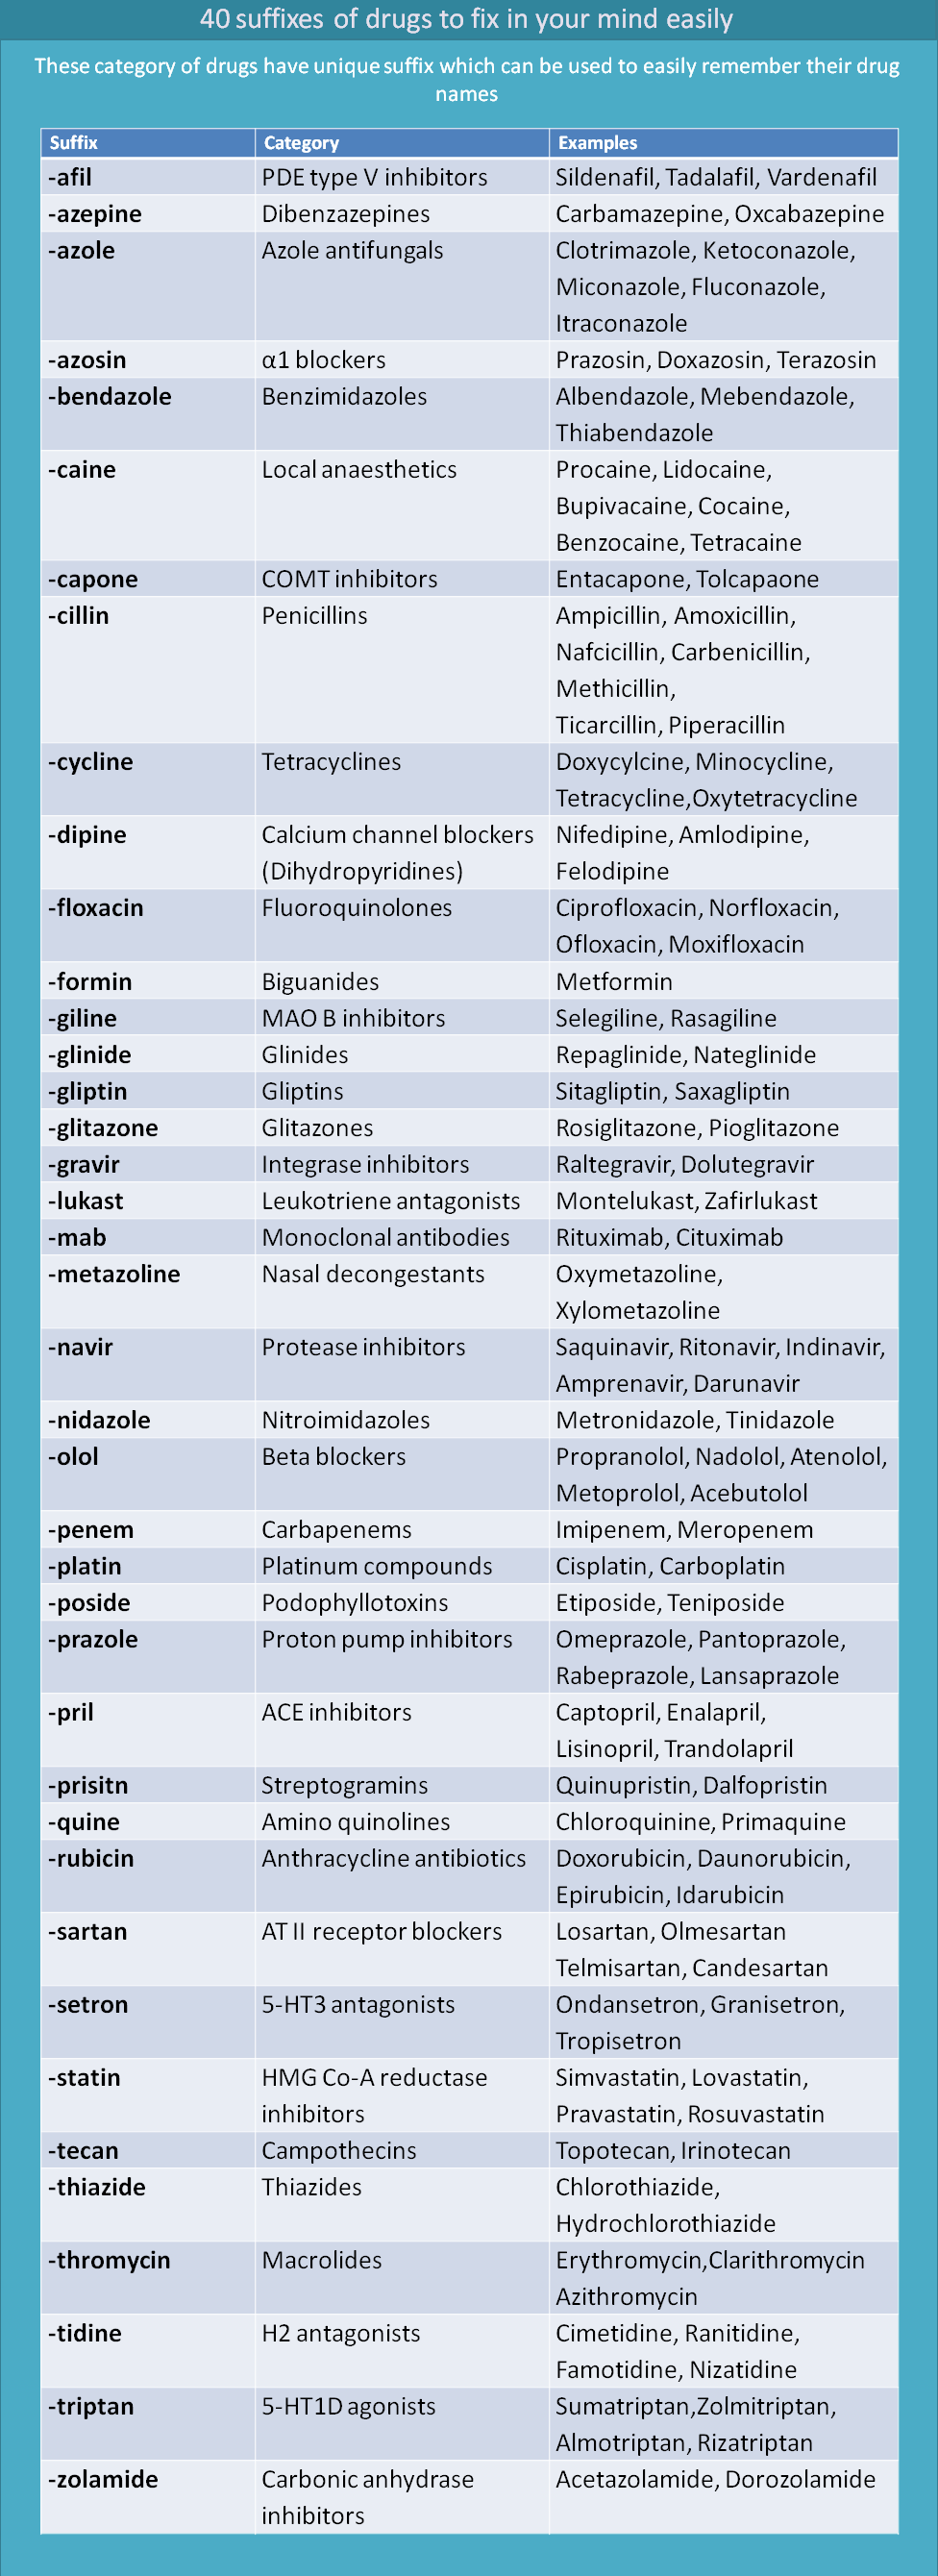 40 suffixes of drugs easy to remember